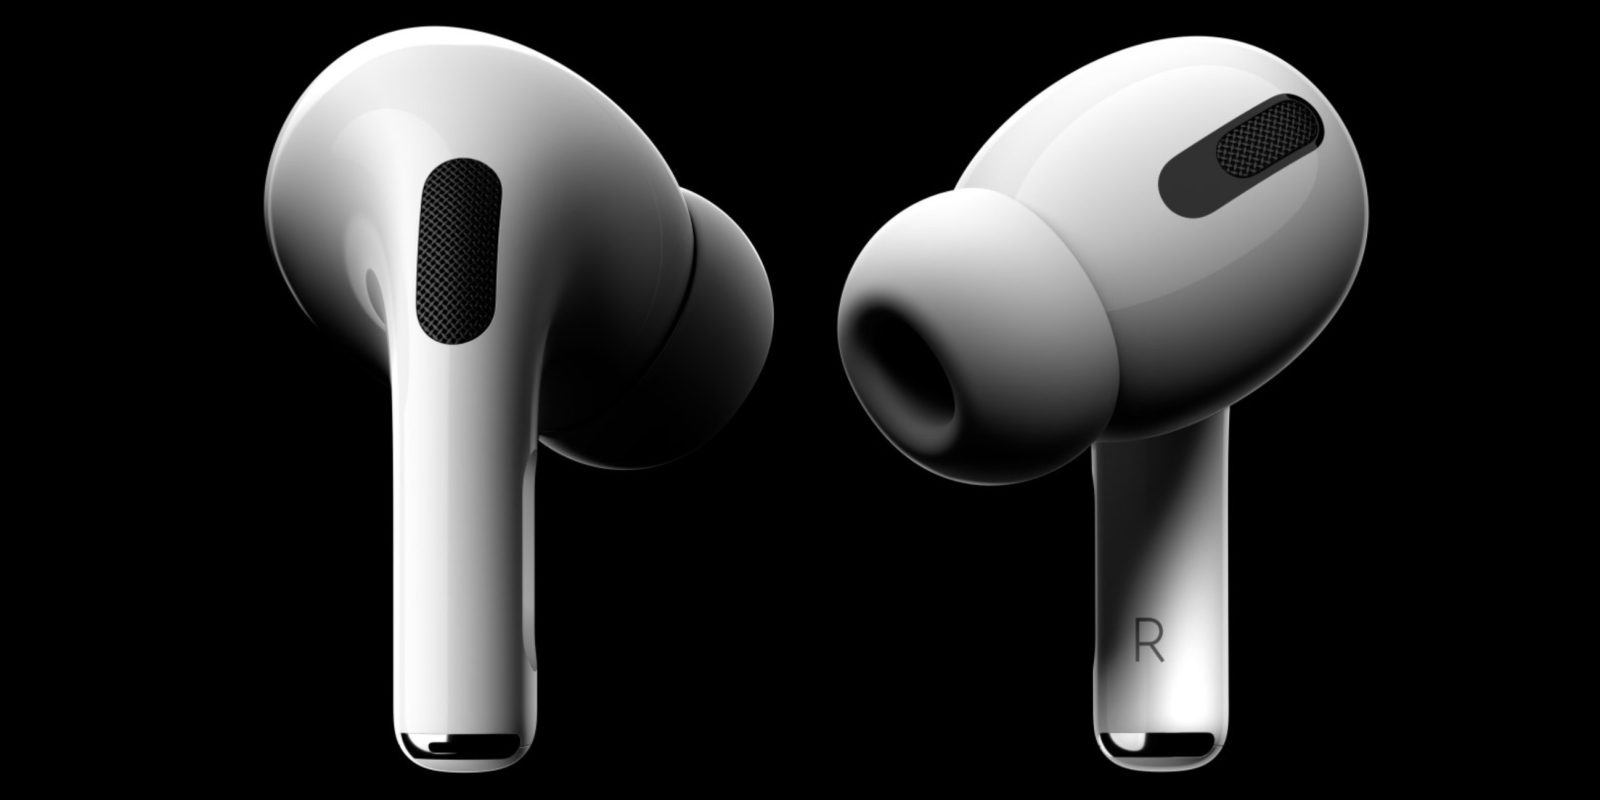 AirPods Pro vs AirPods comparison features price size weight